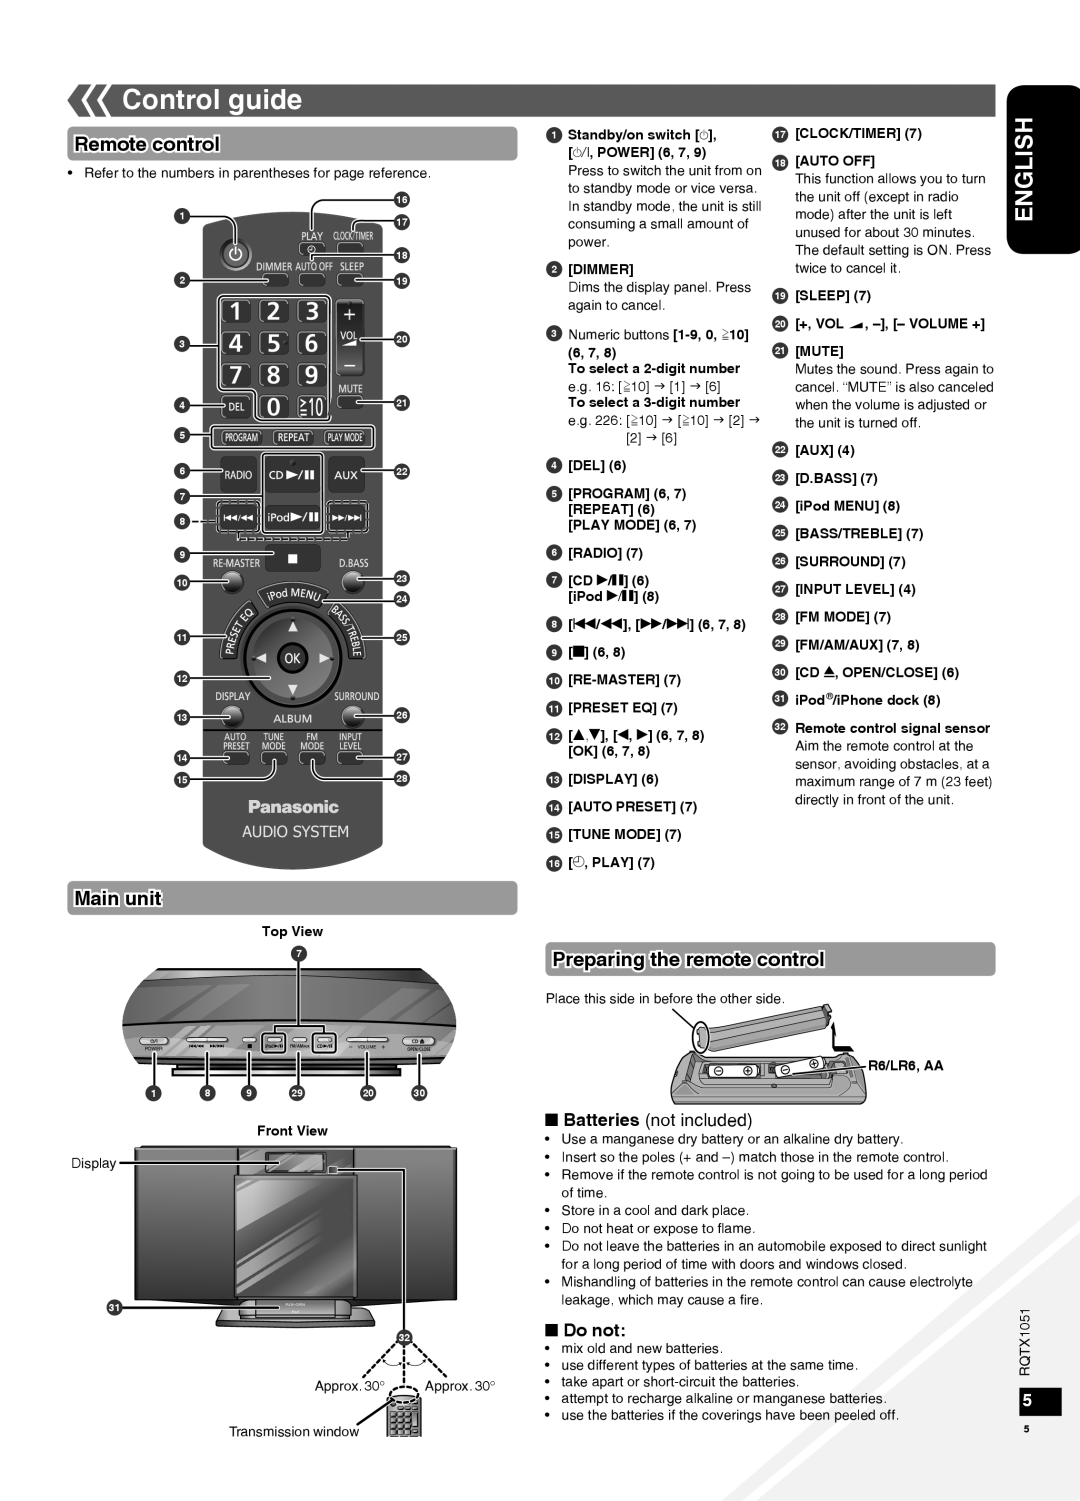 Panasonic SC-HC20 Control guide, Remote control, Main unit, Preparing the remote control, Batteries not included, Do not 